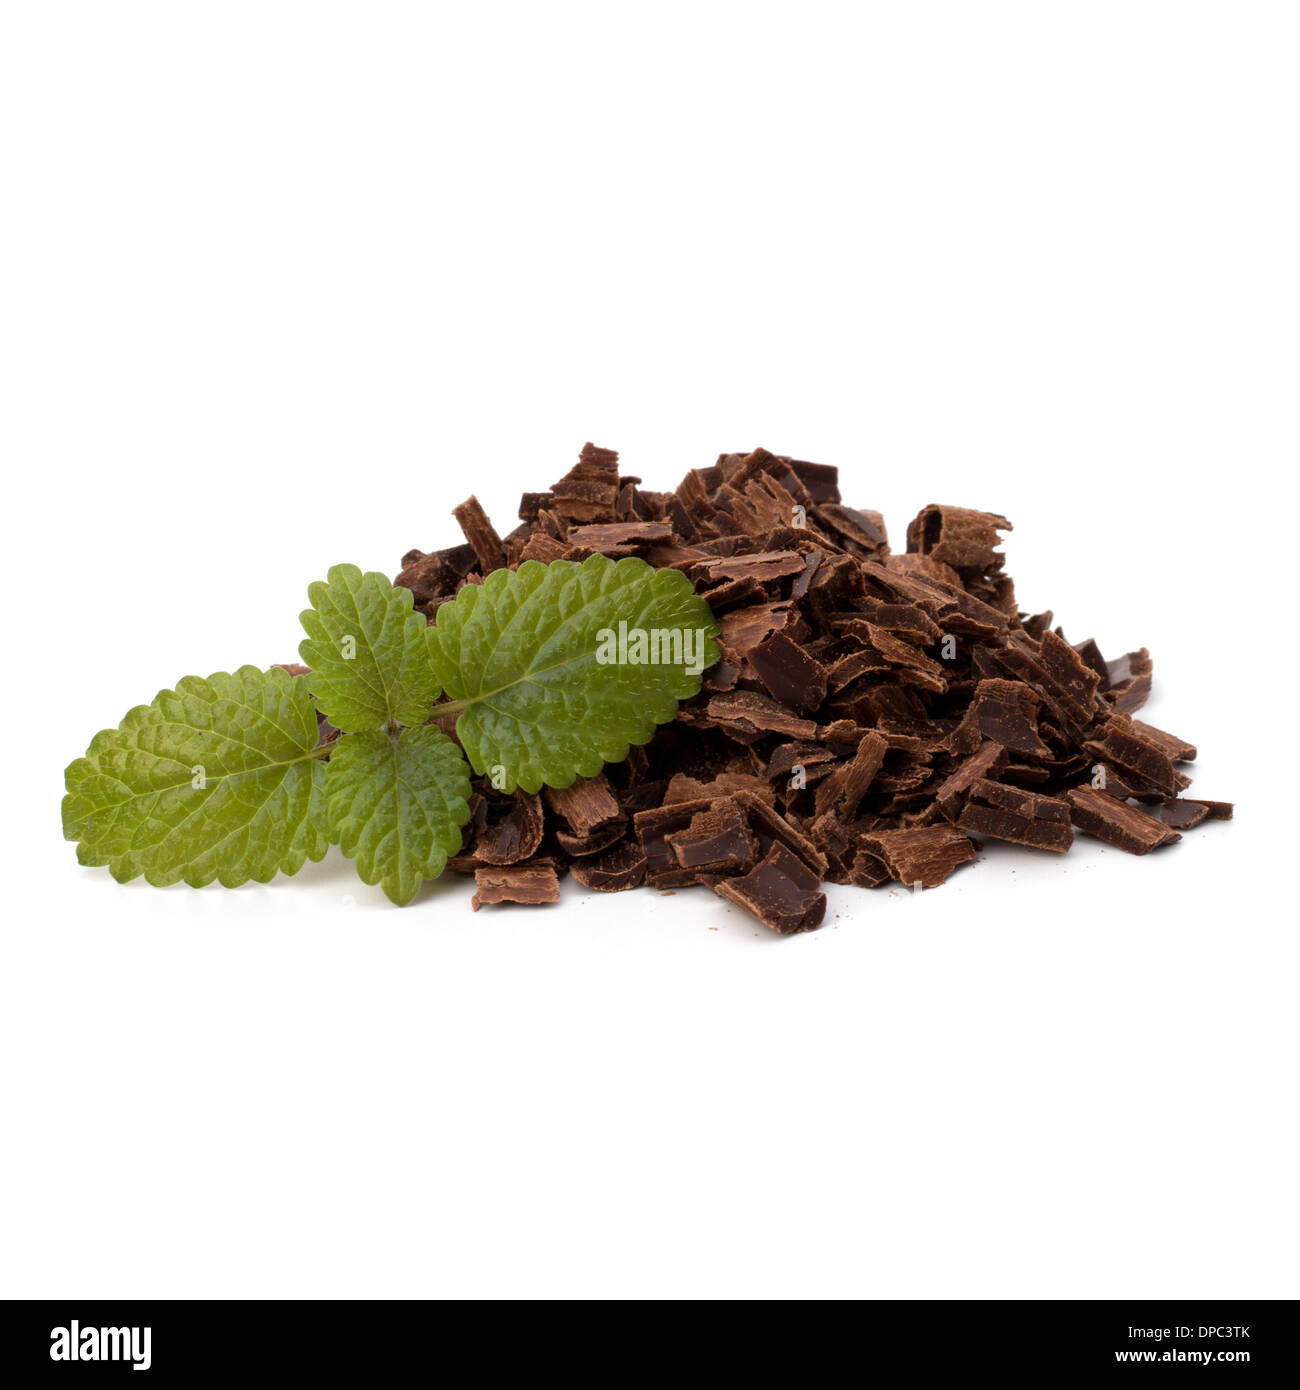 Crushed chocolate shavings pile and mint leaf isolated on white background Stock Photo